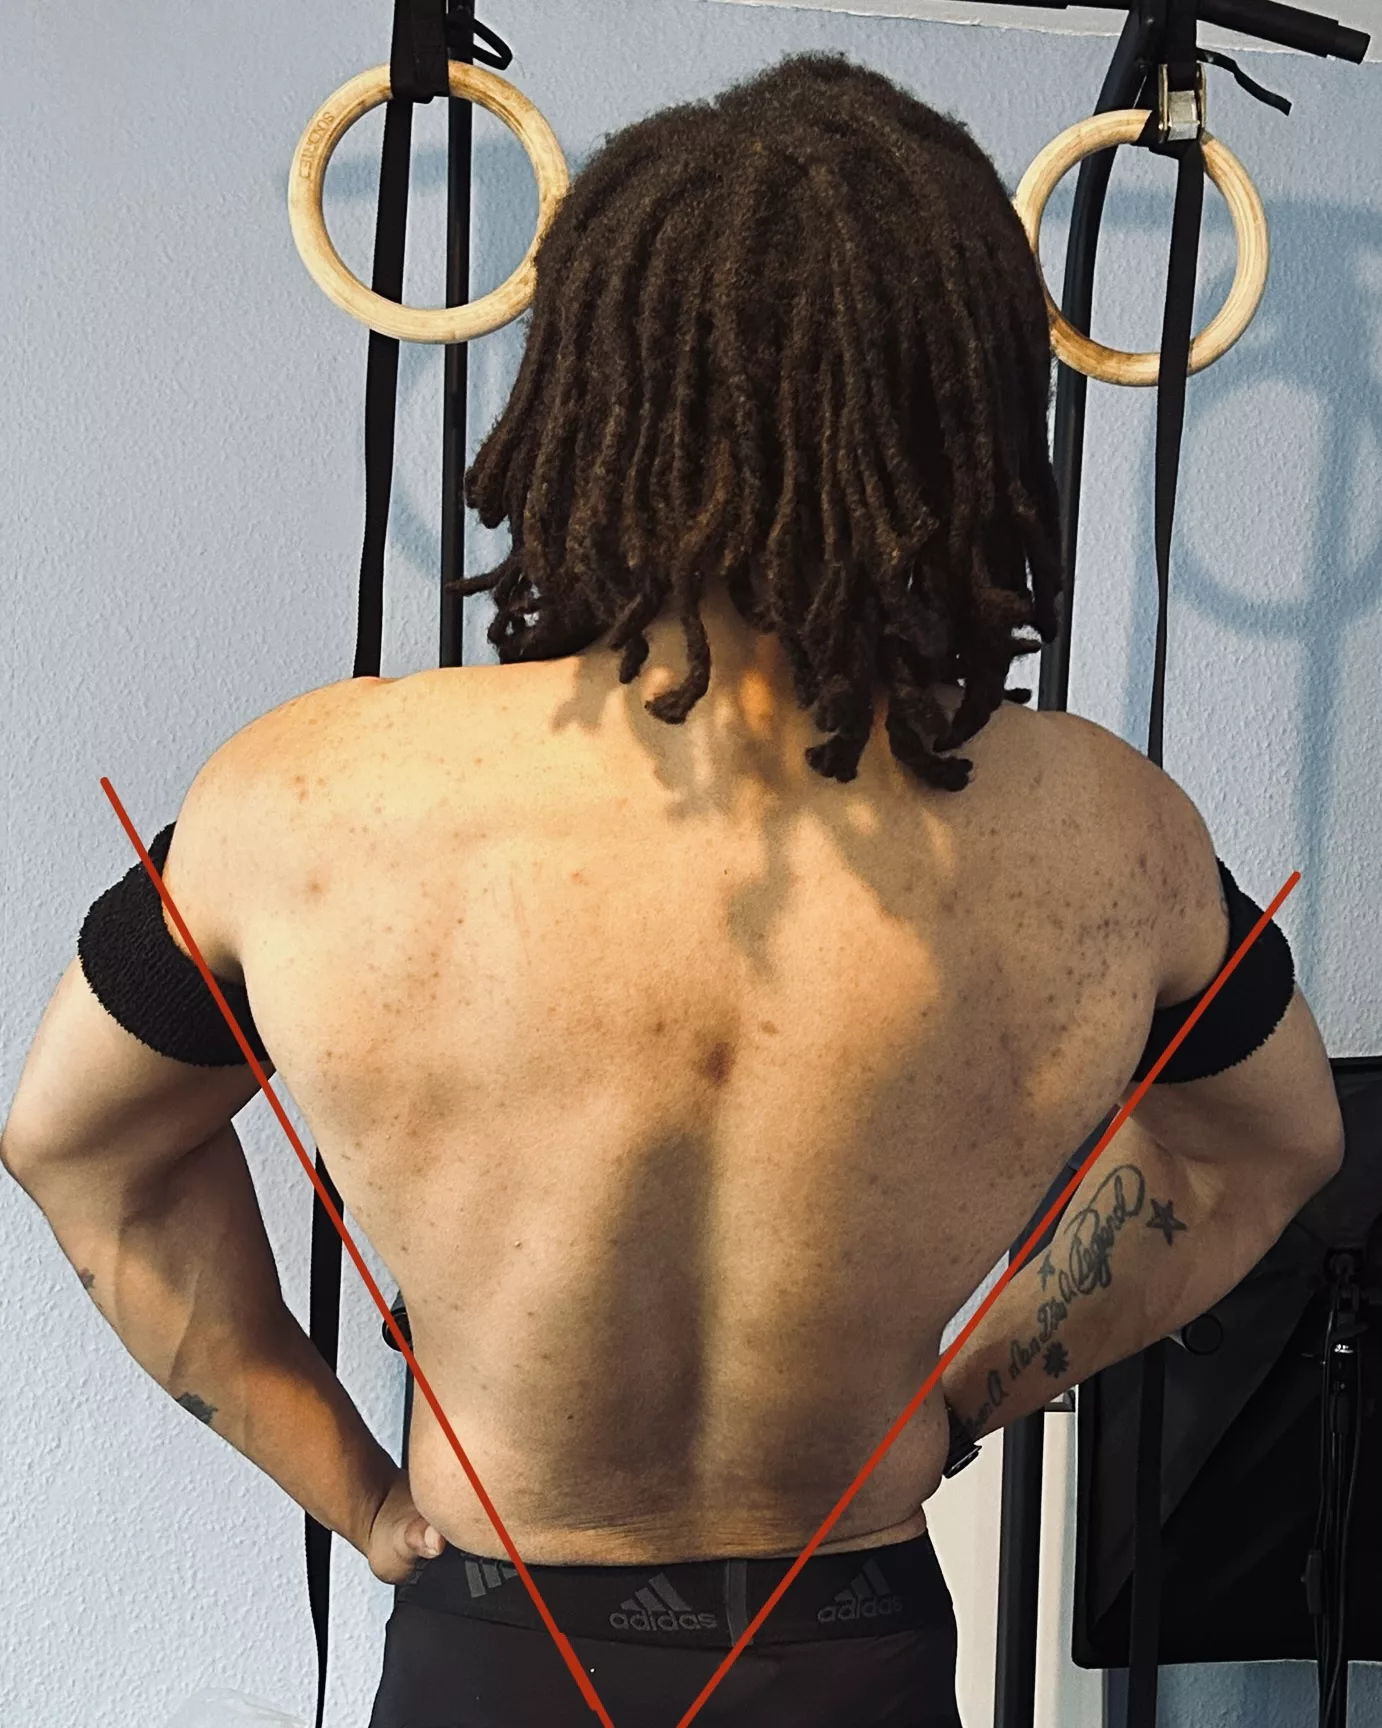 Here's How to Build a Wide Back (The V-Taper Look!)